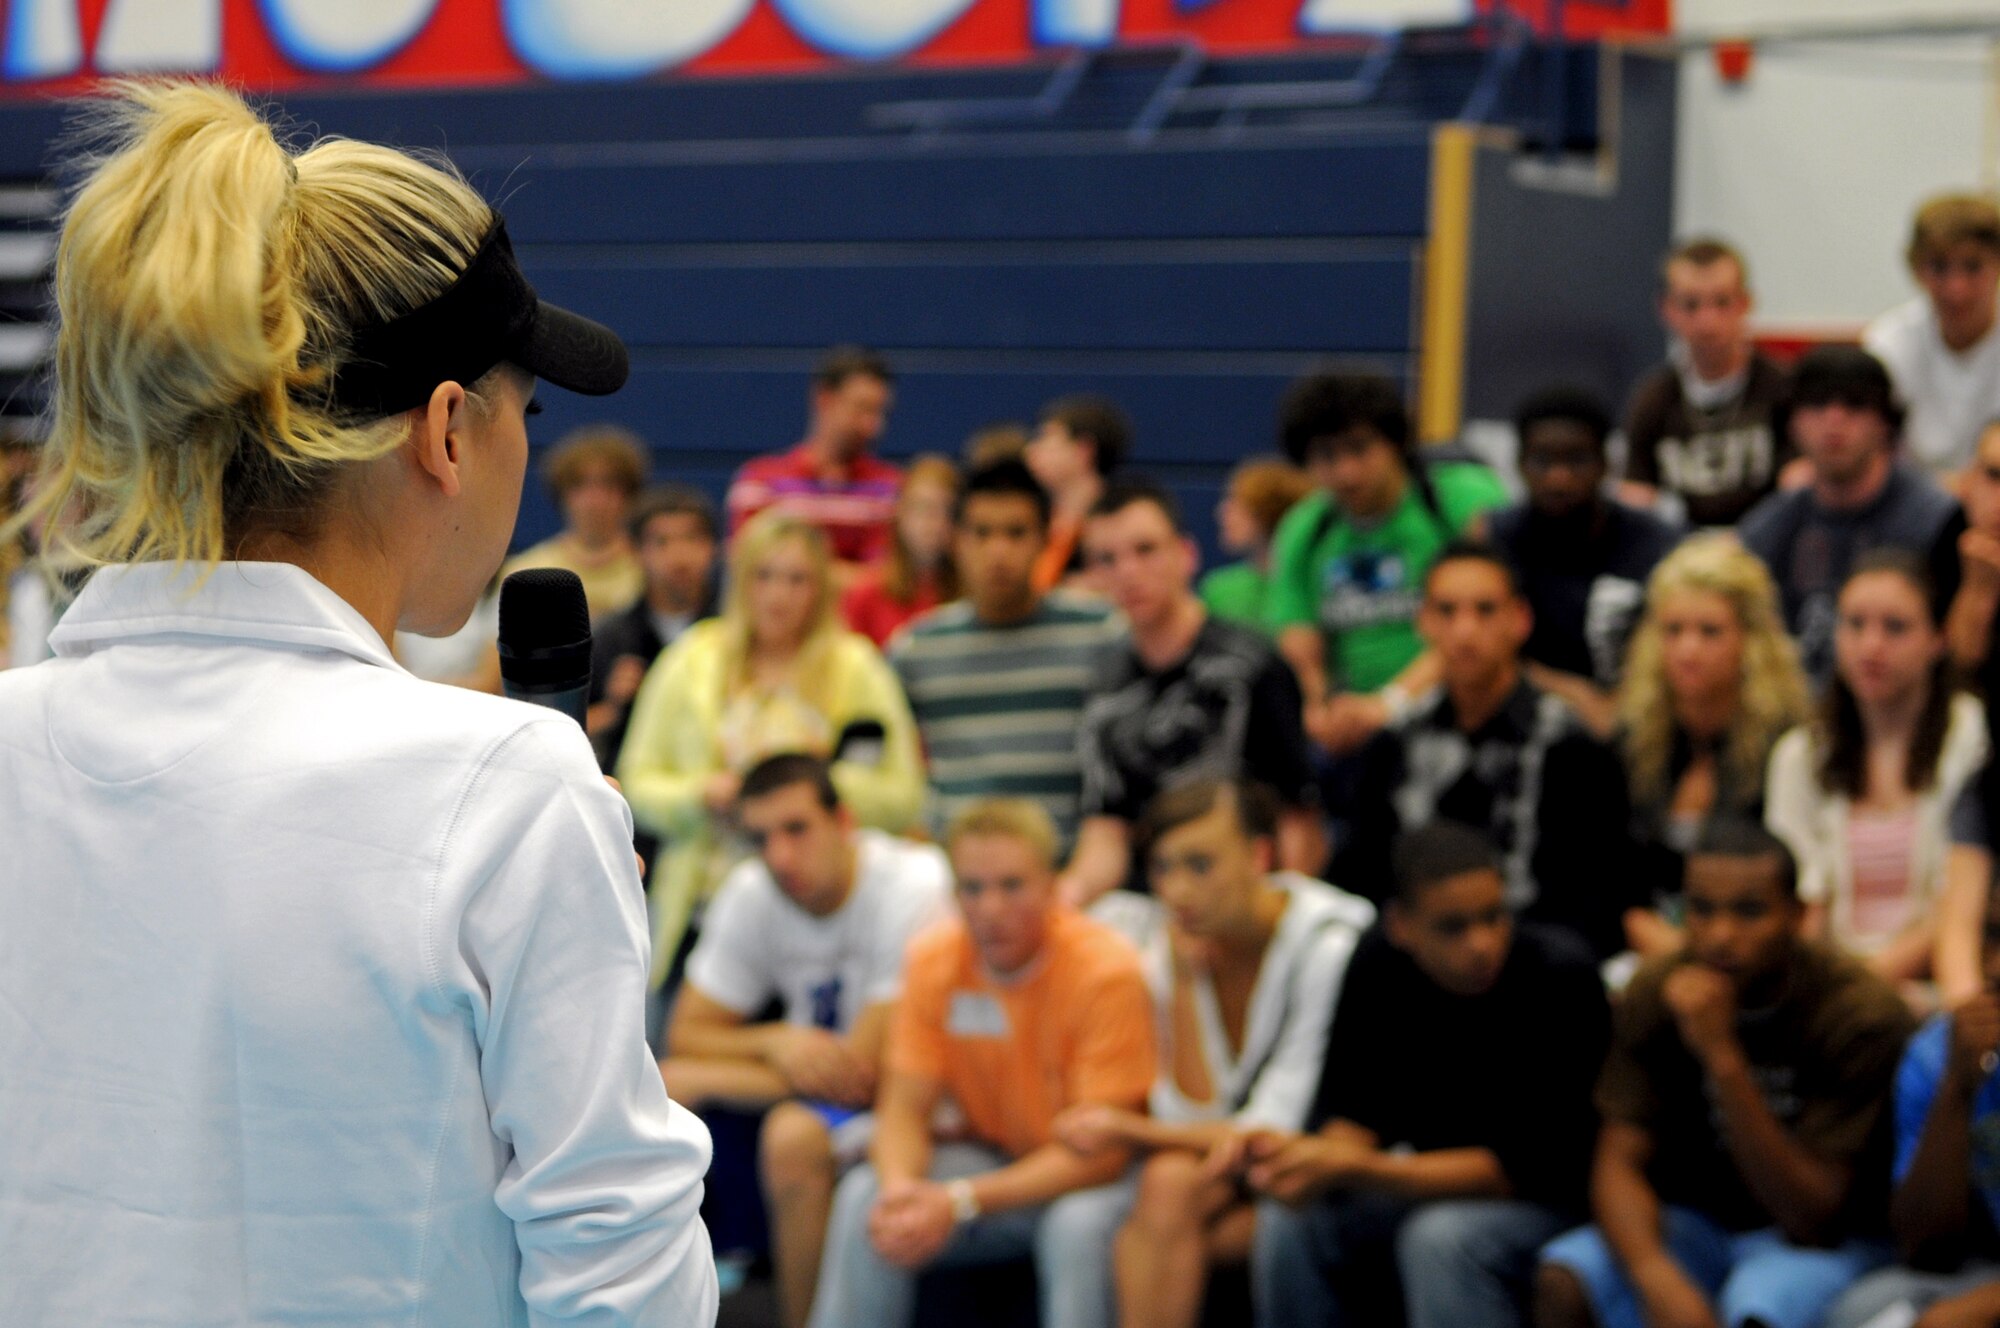 Anna Kournikova, former professional tennis player, talks to students at Ramstein High School, Ramstein Air Base, Germany, May 19, 2009, about school, her tennis career and working hard.  Kournikova visits with students as part of a six-day educational United Service Organizations tour. (U.S. Air Force photo by Airman 1st Class Grovert Fuentes-Contreras)